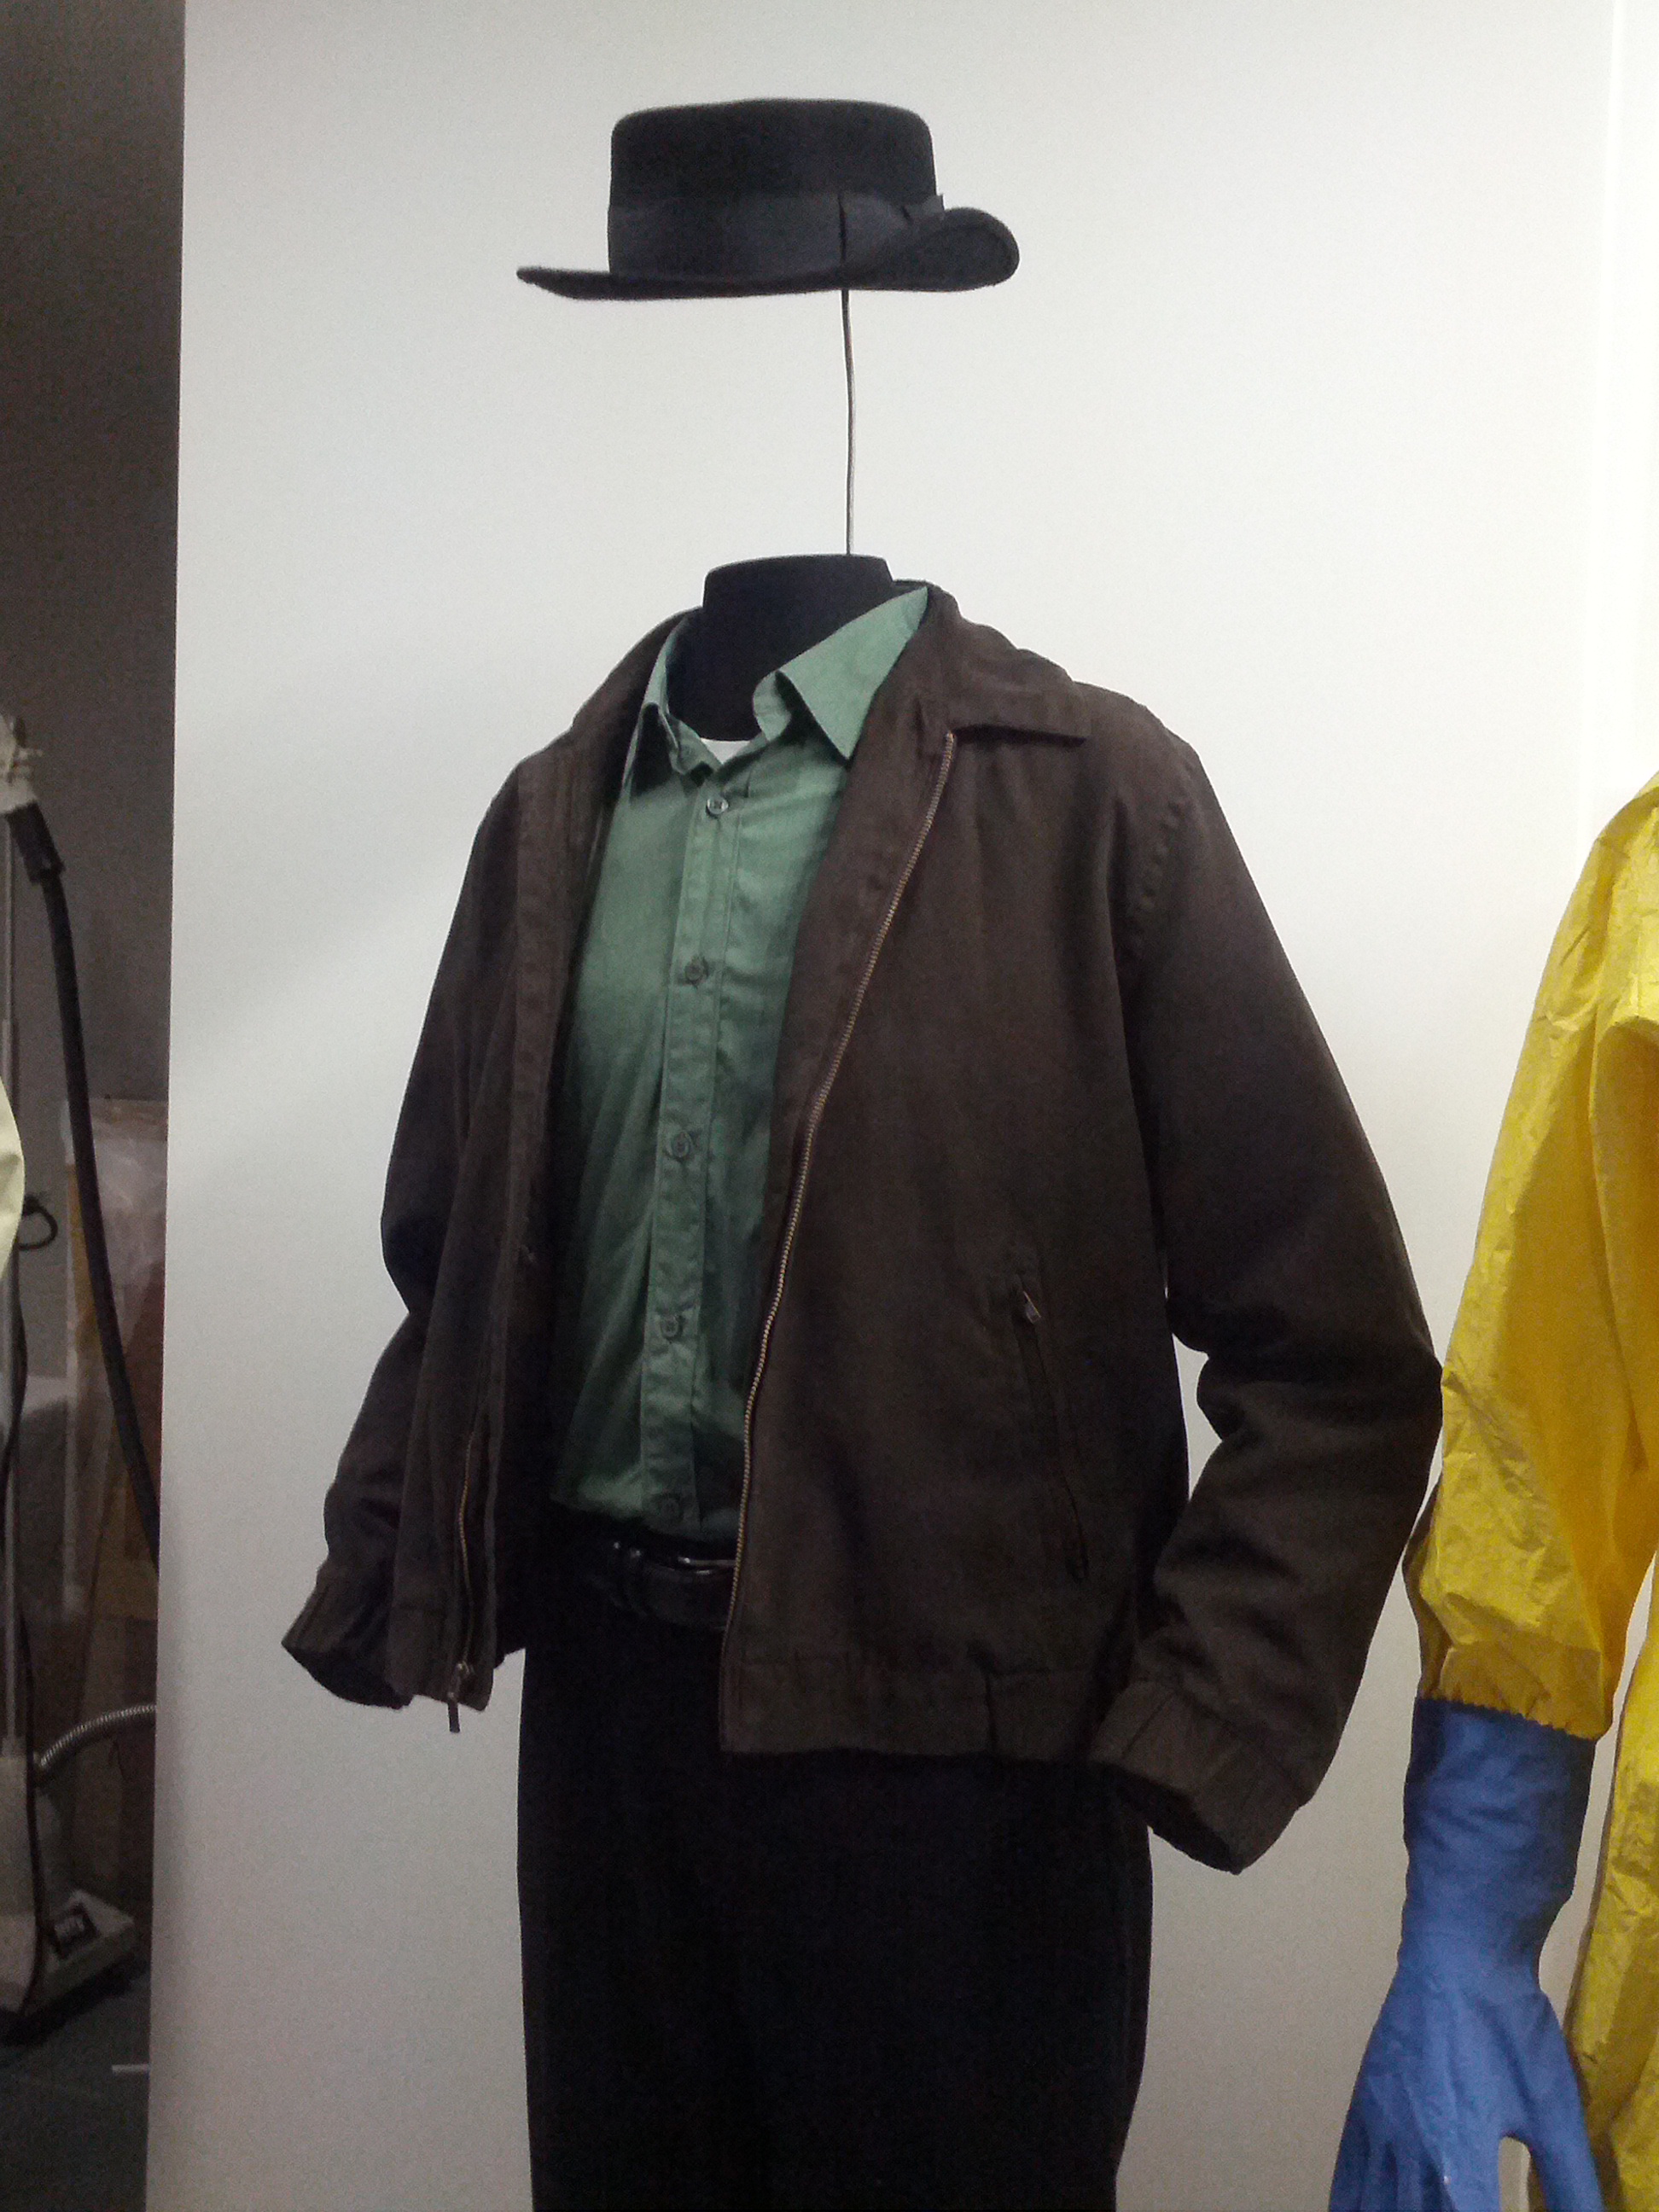 Costume worn for the series 'Breaking Bad' dressed on a mannequin